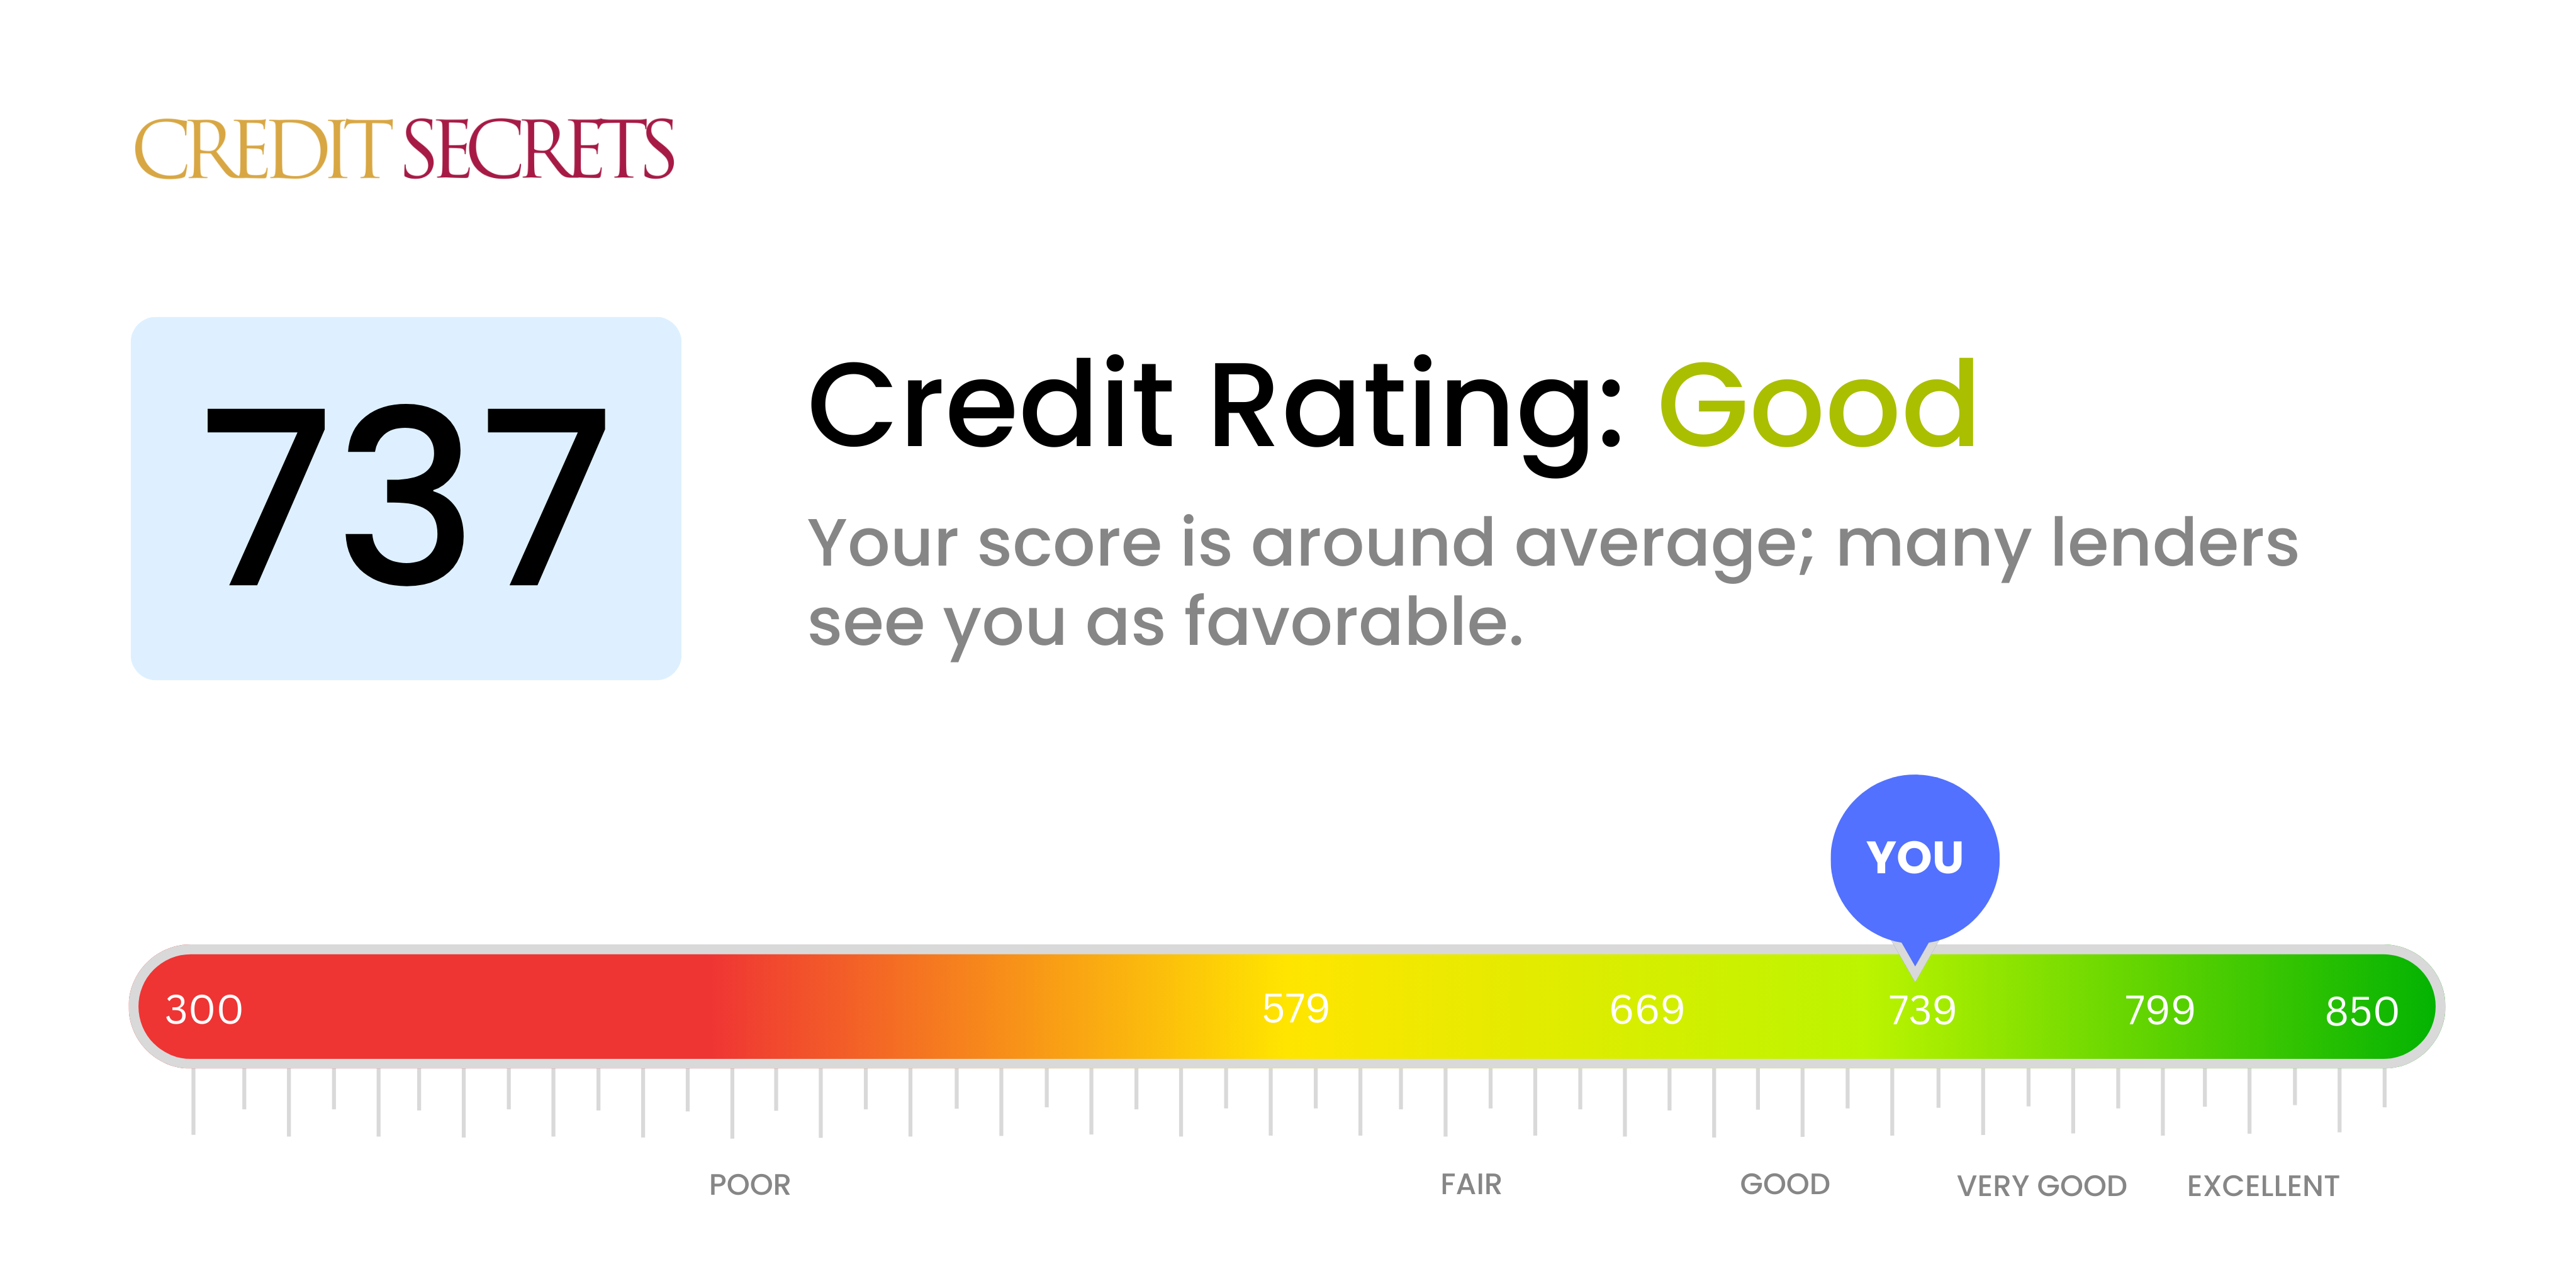 Is 737 a good credit score?